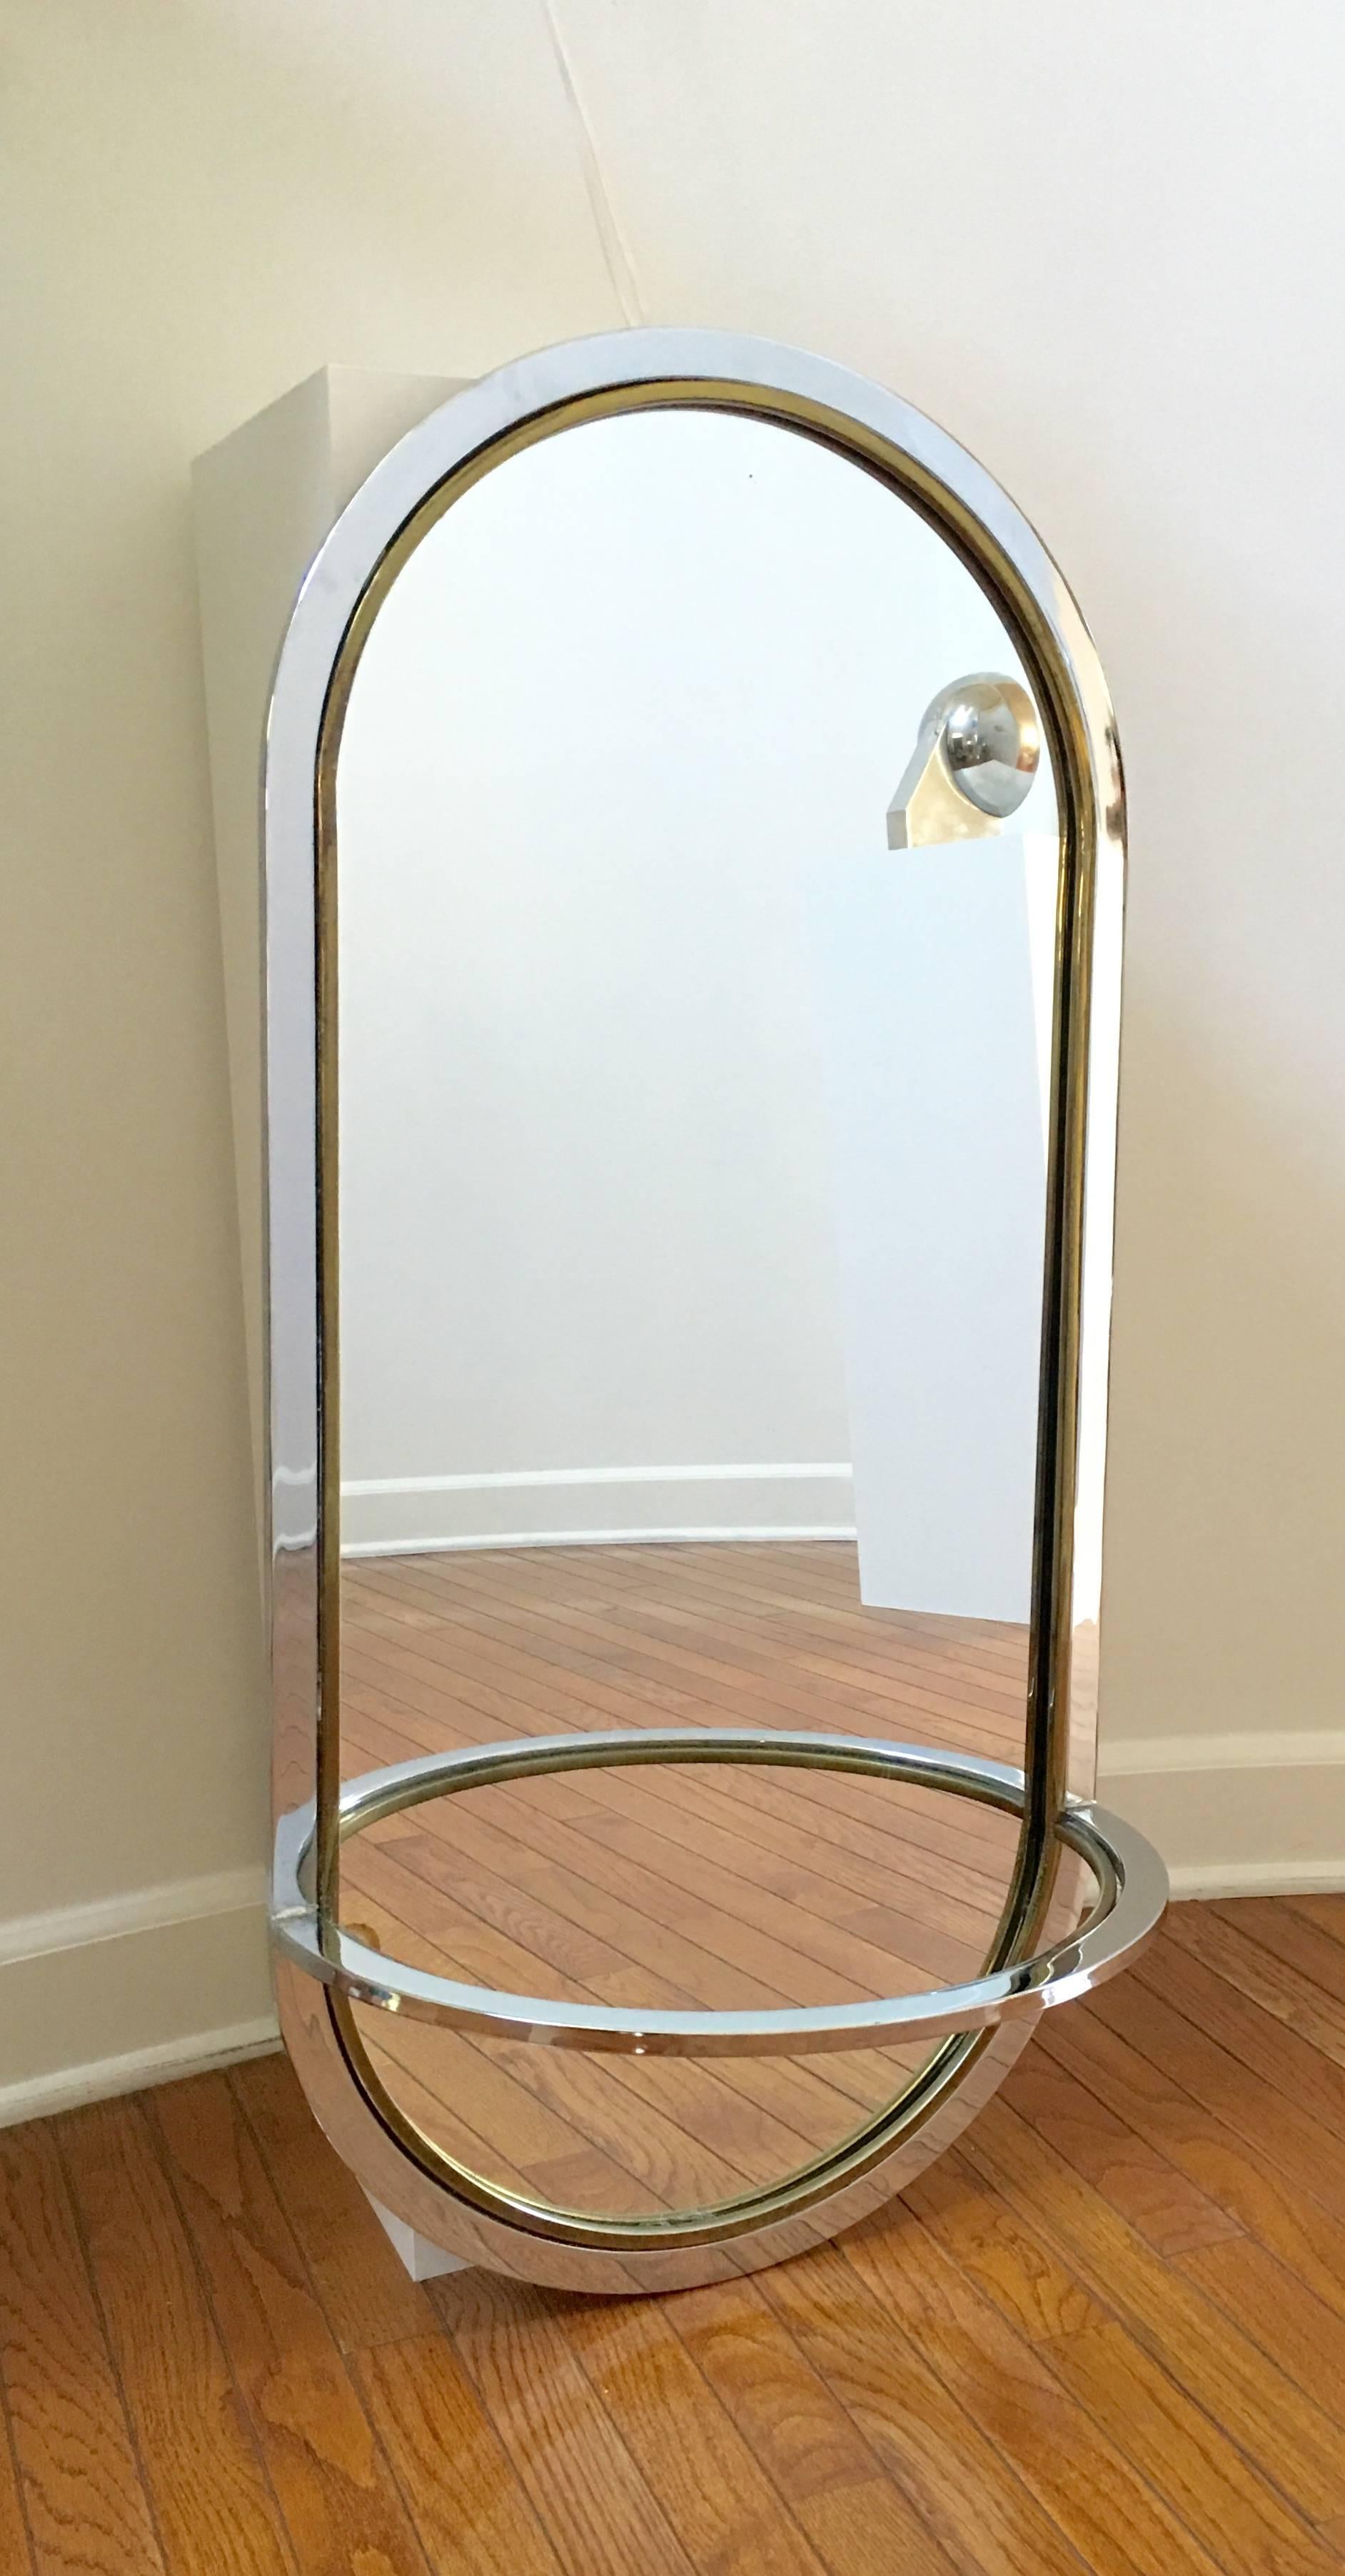 This 1970s style, oblong mirror has a chrome and brass frame with a shelf that has a clear Lucite inset. Wonderful presence and scale.